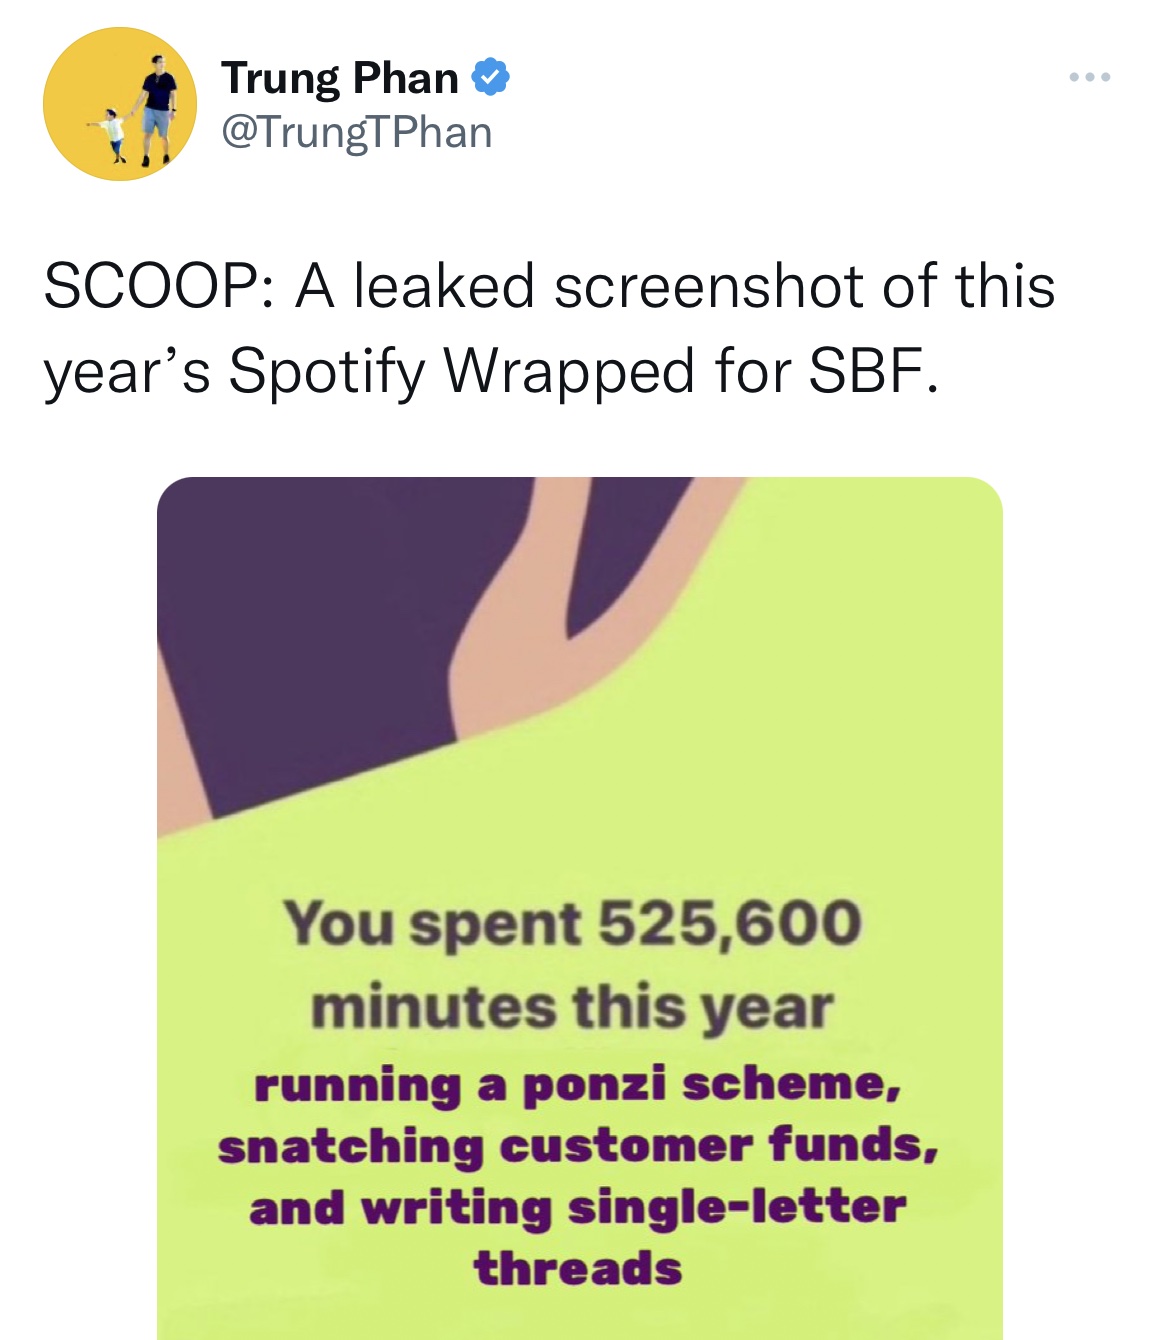 Spotify Wrapped Memes - all you can eat - Trung Phan g Scoop A leaked screenshot of this year's Spotify Wrapped for Sbf. You spent 525,600 minutes this year running a ponzi scheme, snatching customer funds, and writing singleletter threads